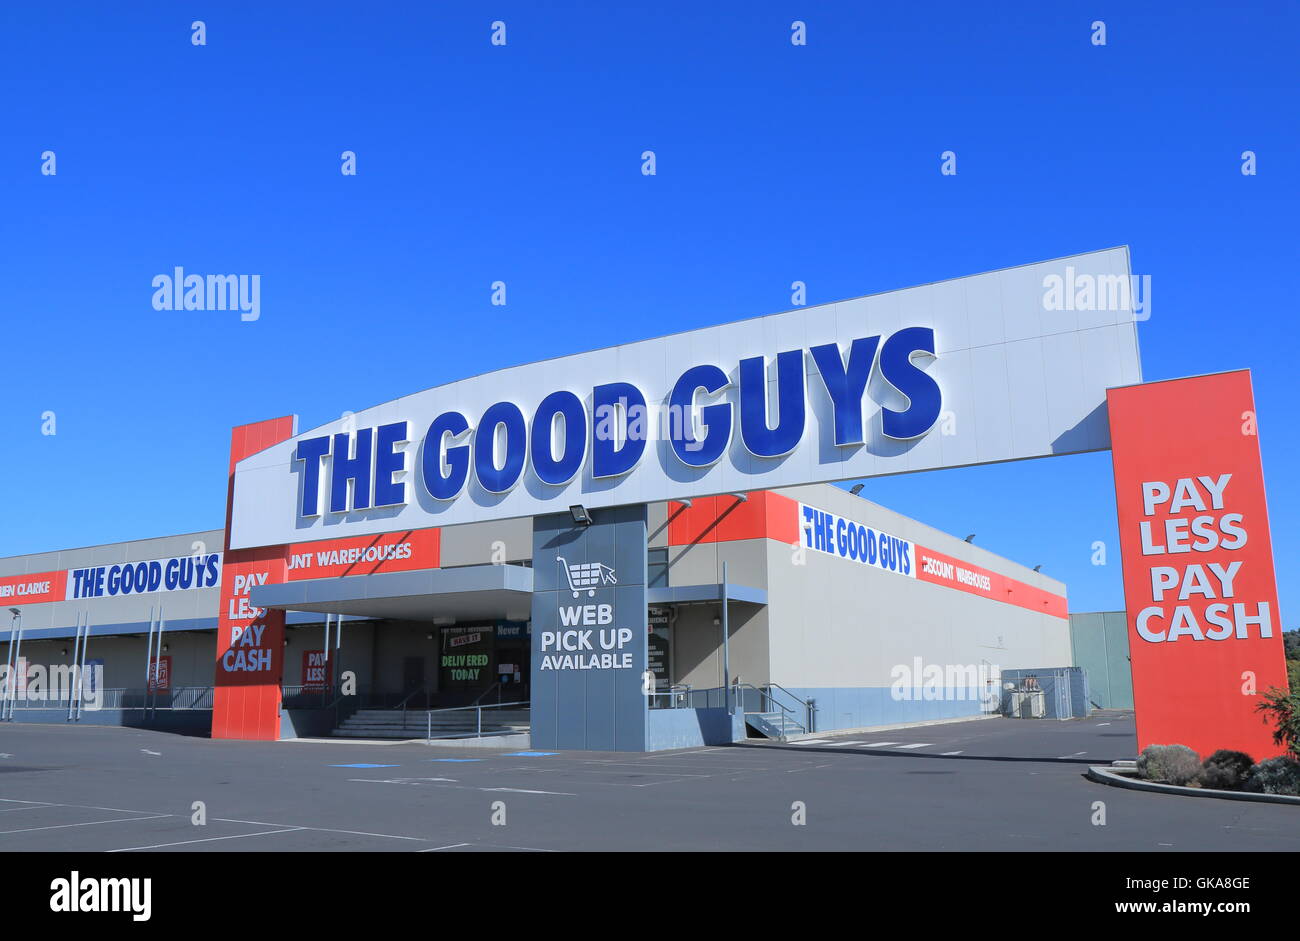 The Good Guys Australia, chain of consumer electronics retail stores in Australia and New Zealand founded in 1952. Stock Photo